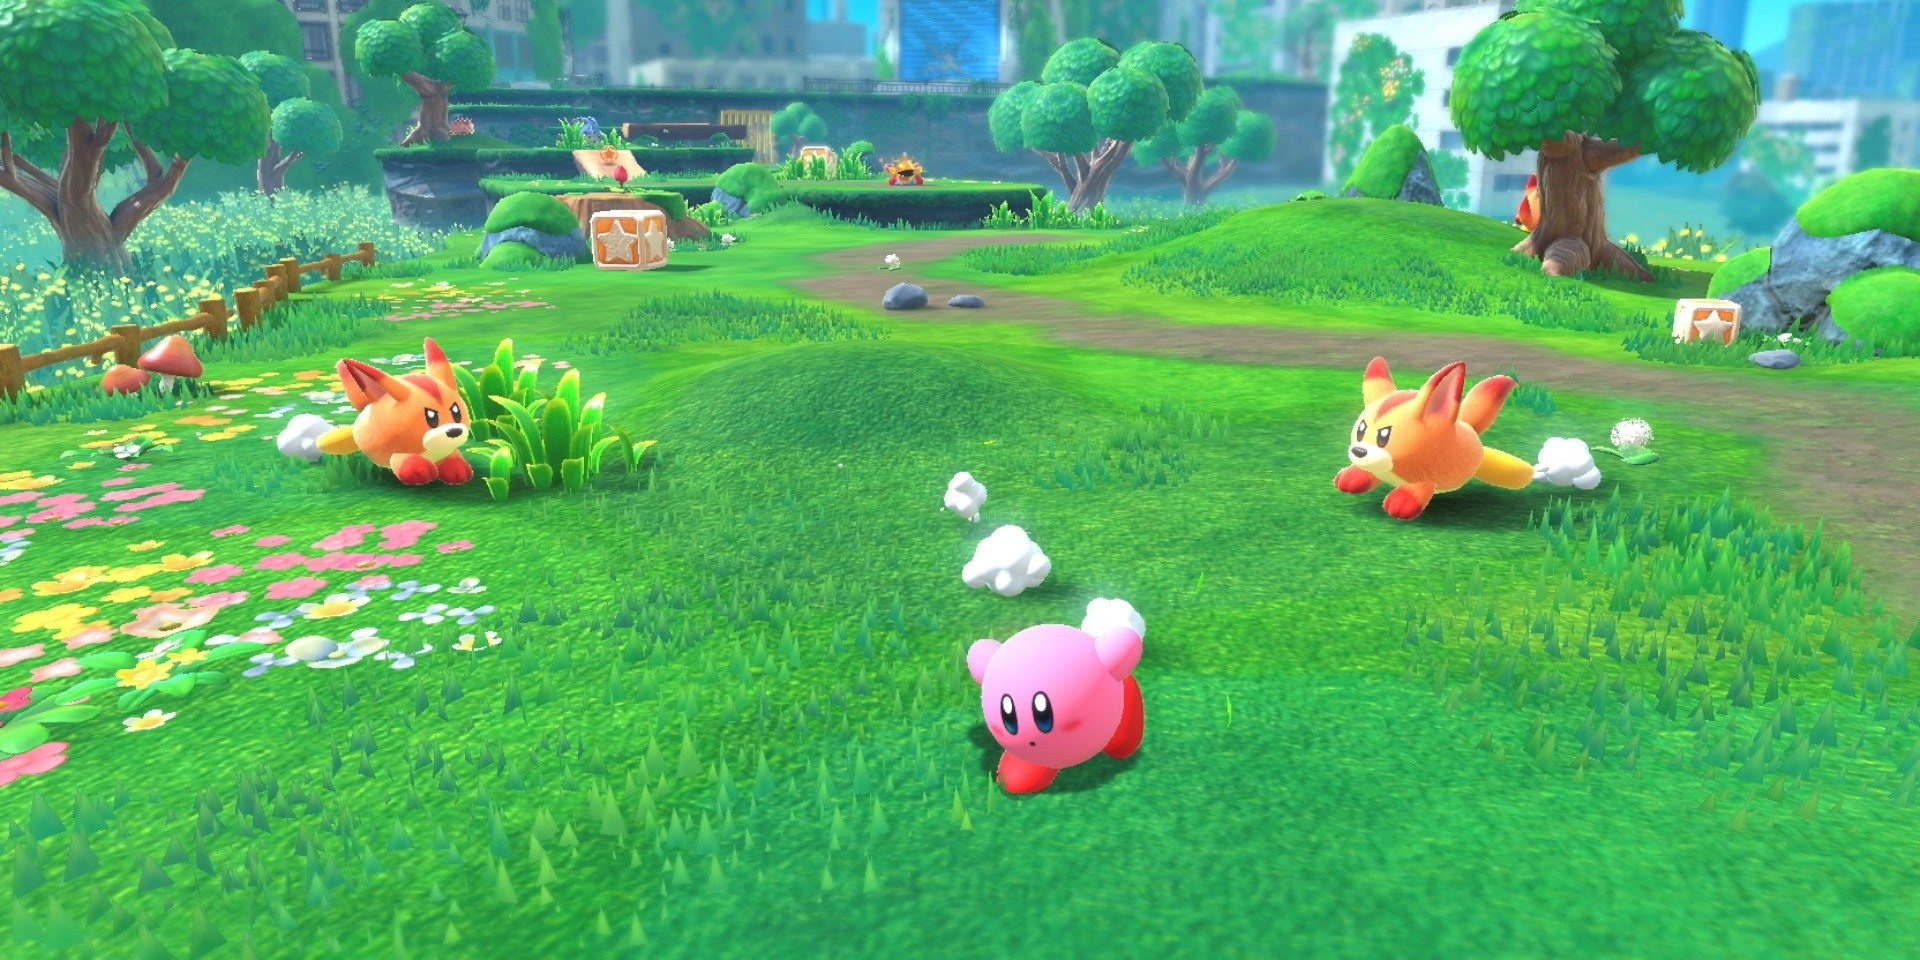 Kirby and the Forgotten Land is coming to Nintendo Switch